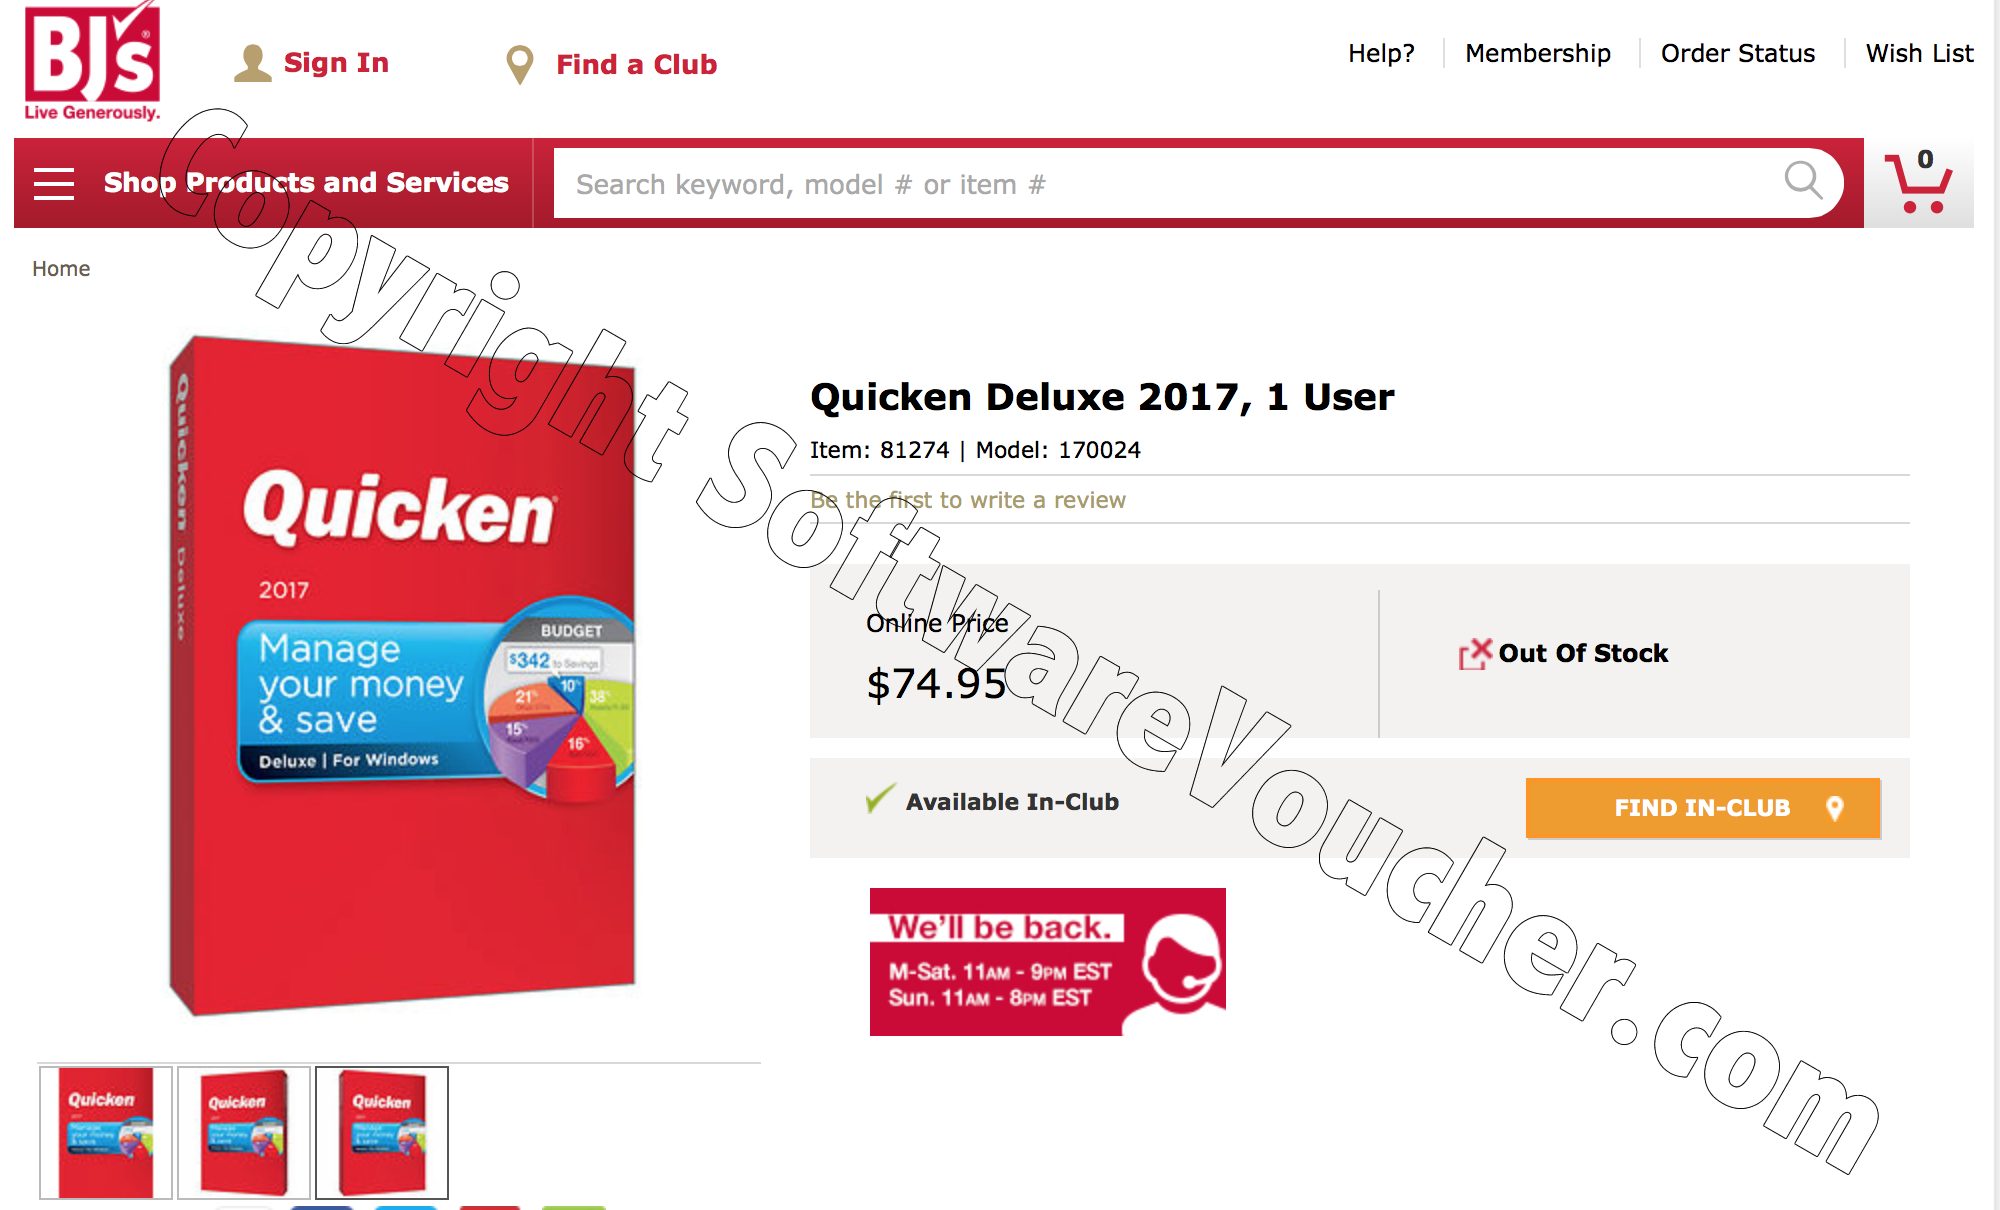 quicken for mac 2017 budgets